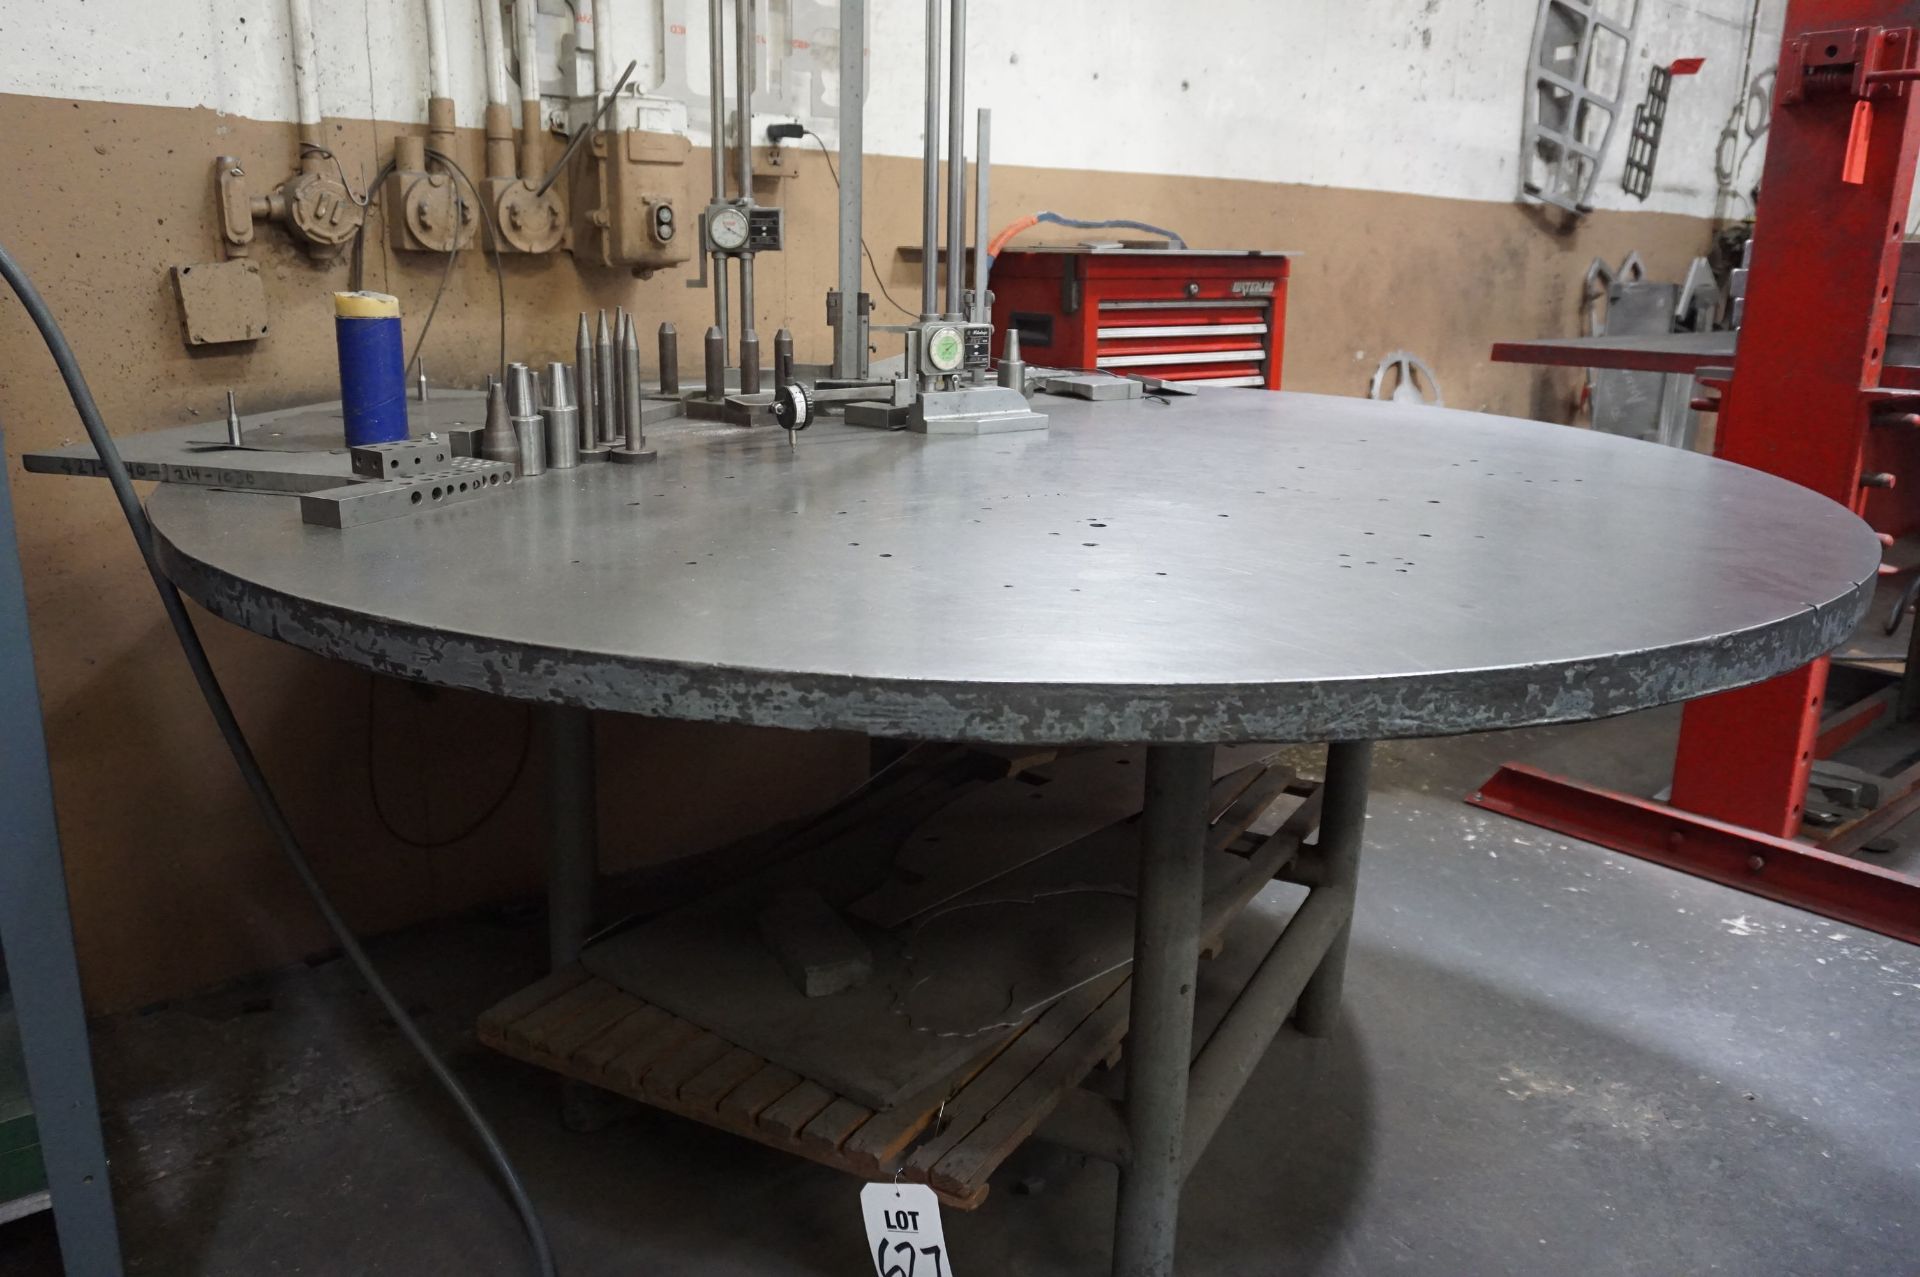 HEAVY DUTY ROUND STEEL TABLE, 72 1/2" DIAMETER, APPROX 36"H *NO CONTENTS TABLE ONLY* - Image 2 of 2